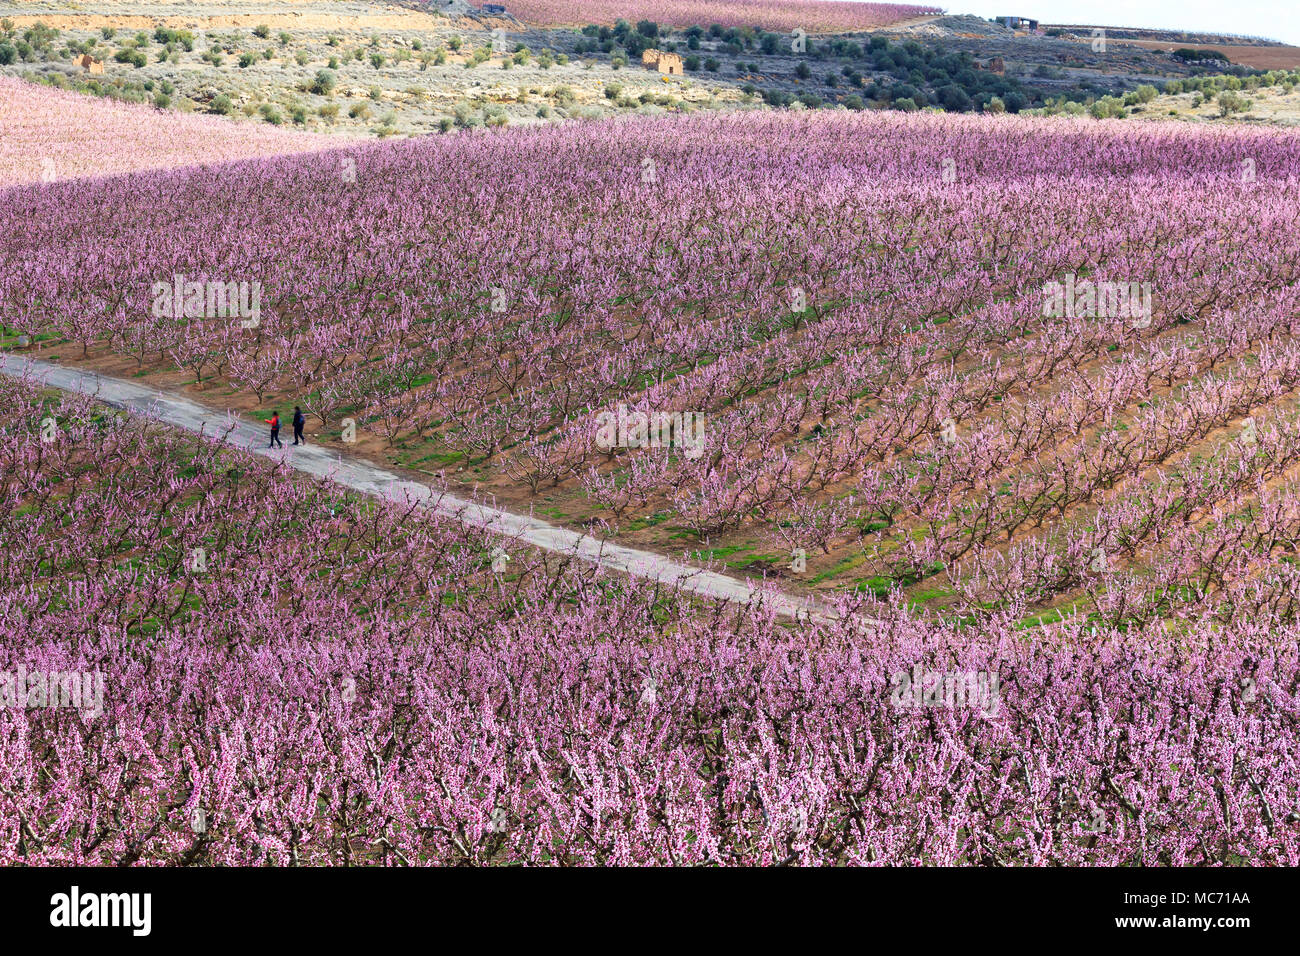 Hikers walking in peach fields in pink flower at spring, in Aitona, Catalonia, Spain Stock Photo